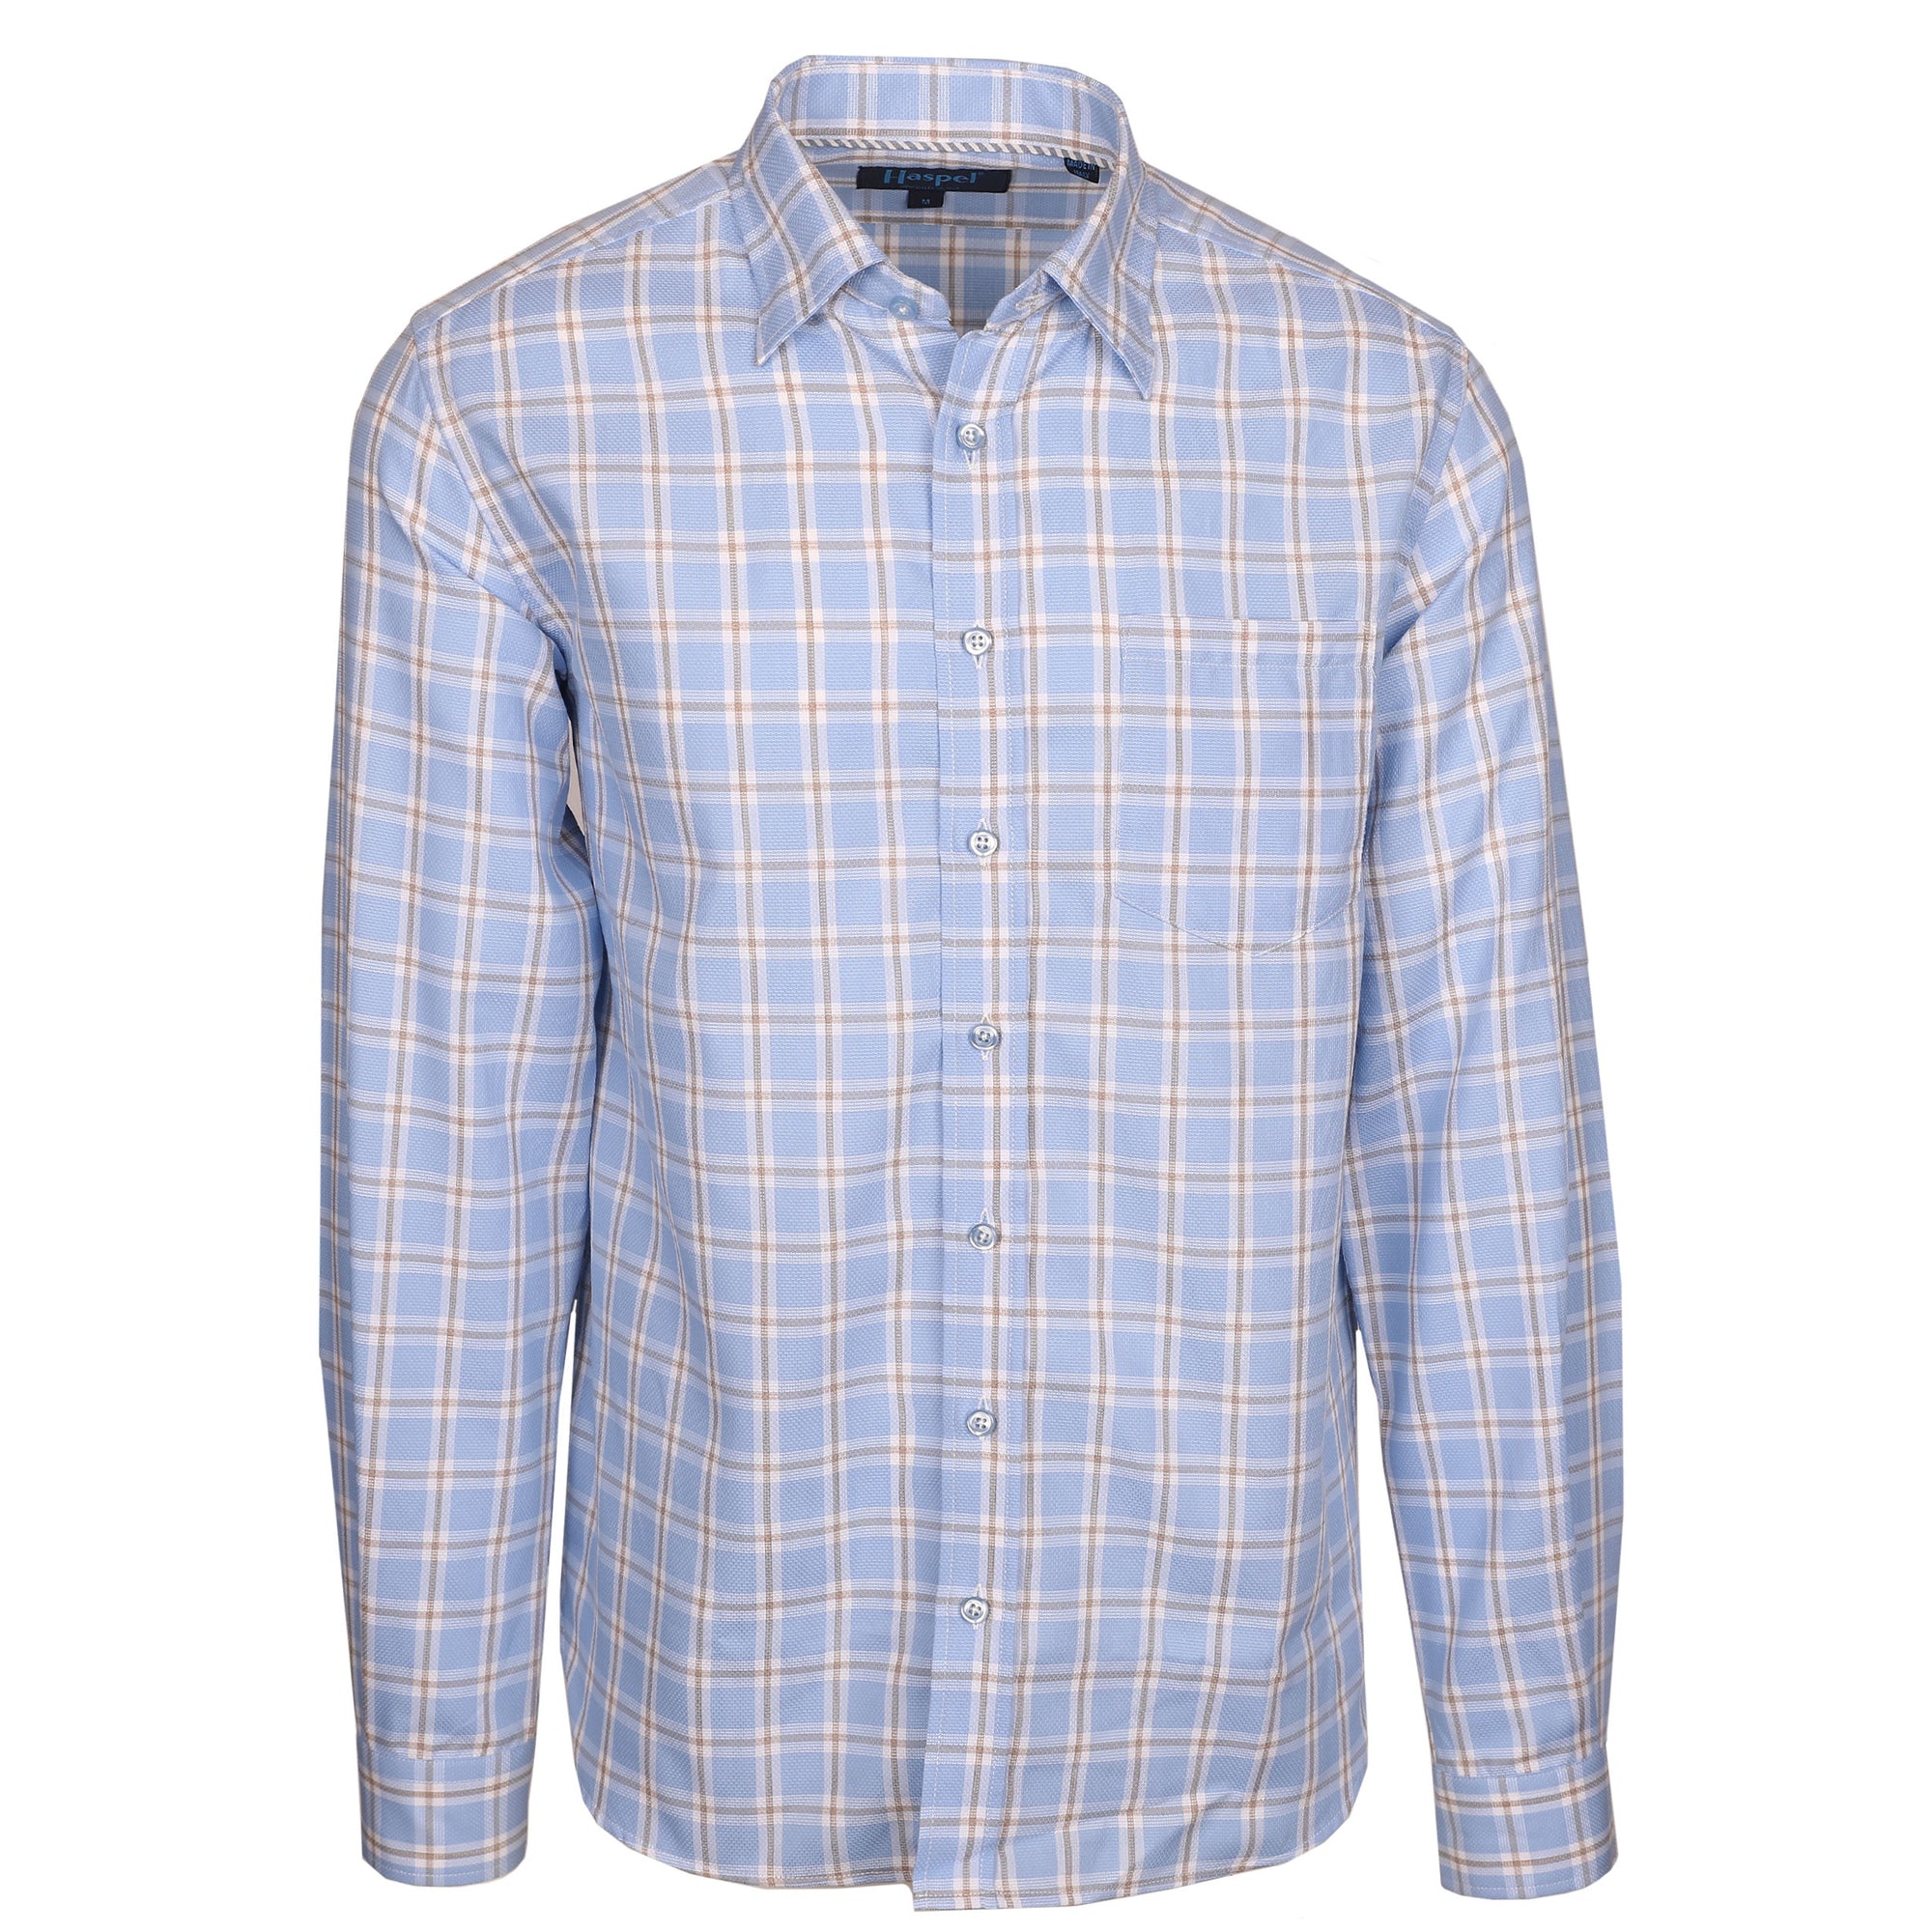 The Treme Light Blue Texture with Tan Check is a timeless design that will instantly upgrade your look. Crafted with a light blue texture and tan check pattern, this piece will be your go-to for special occasions. Perfect for adding a touch of sophistication to your wardrobe.  100% Cotton • Hidden Button Collar • Long Sleeve • Chest Pocket • Machine Washable • Made in Italy • Return Policy